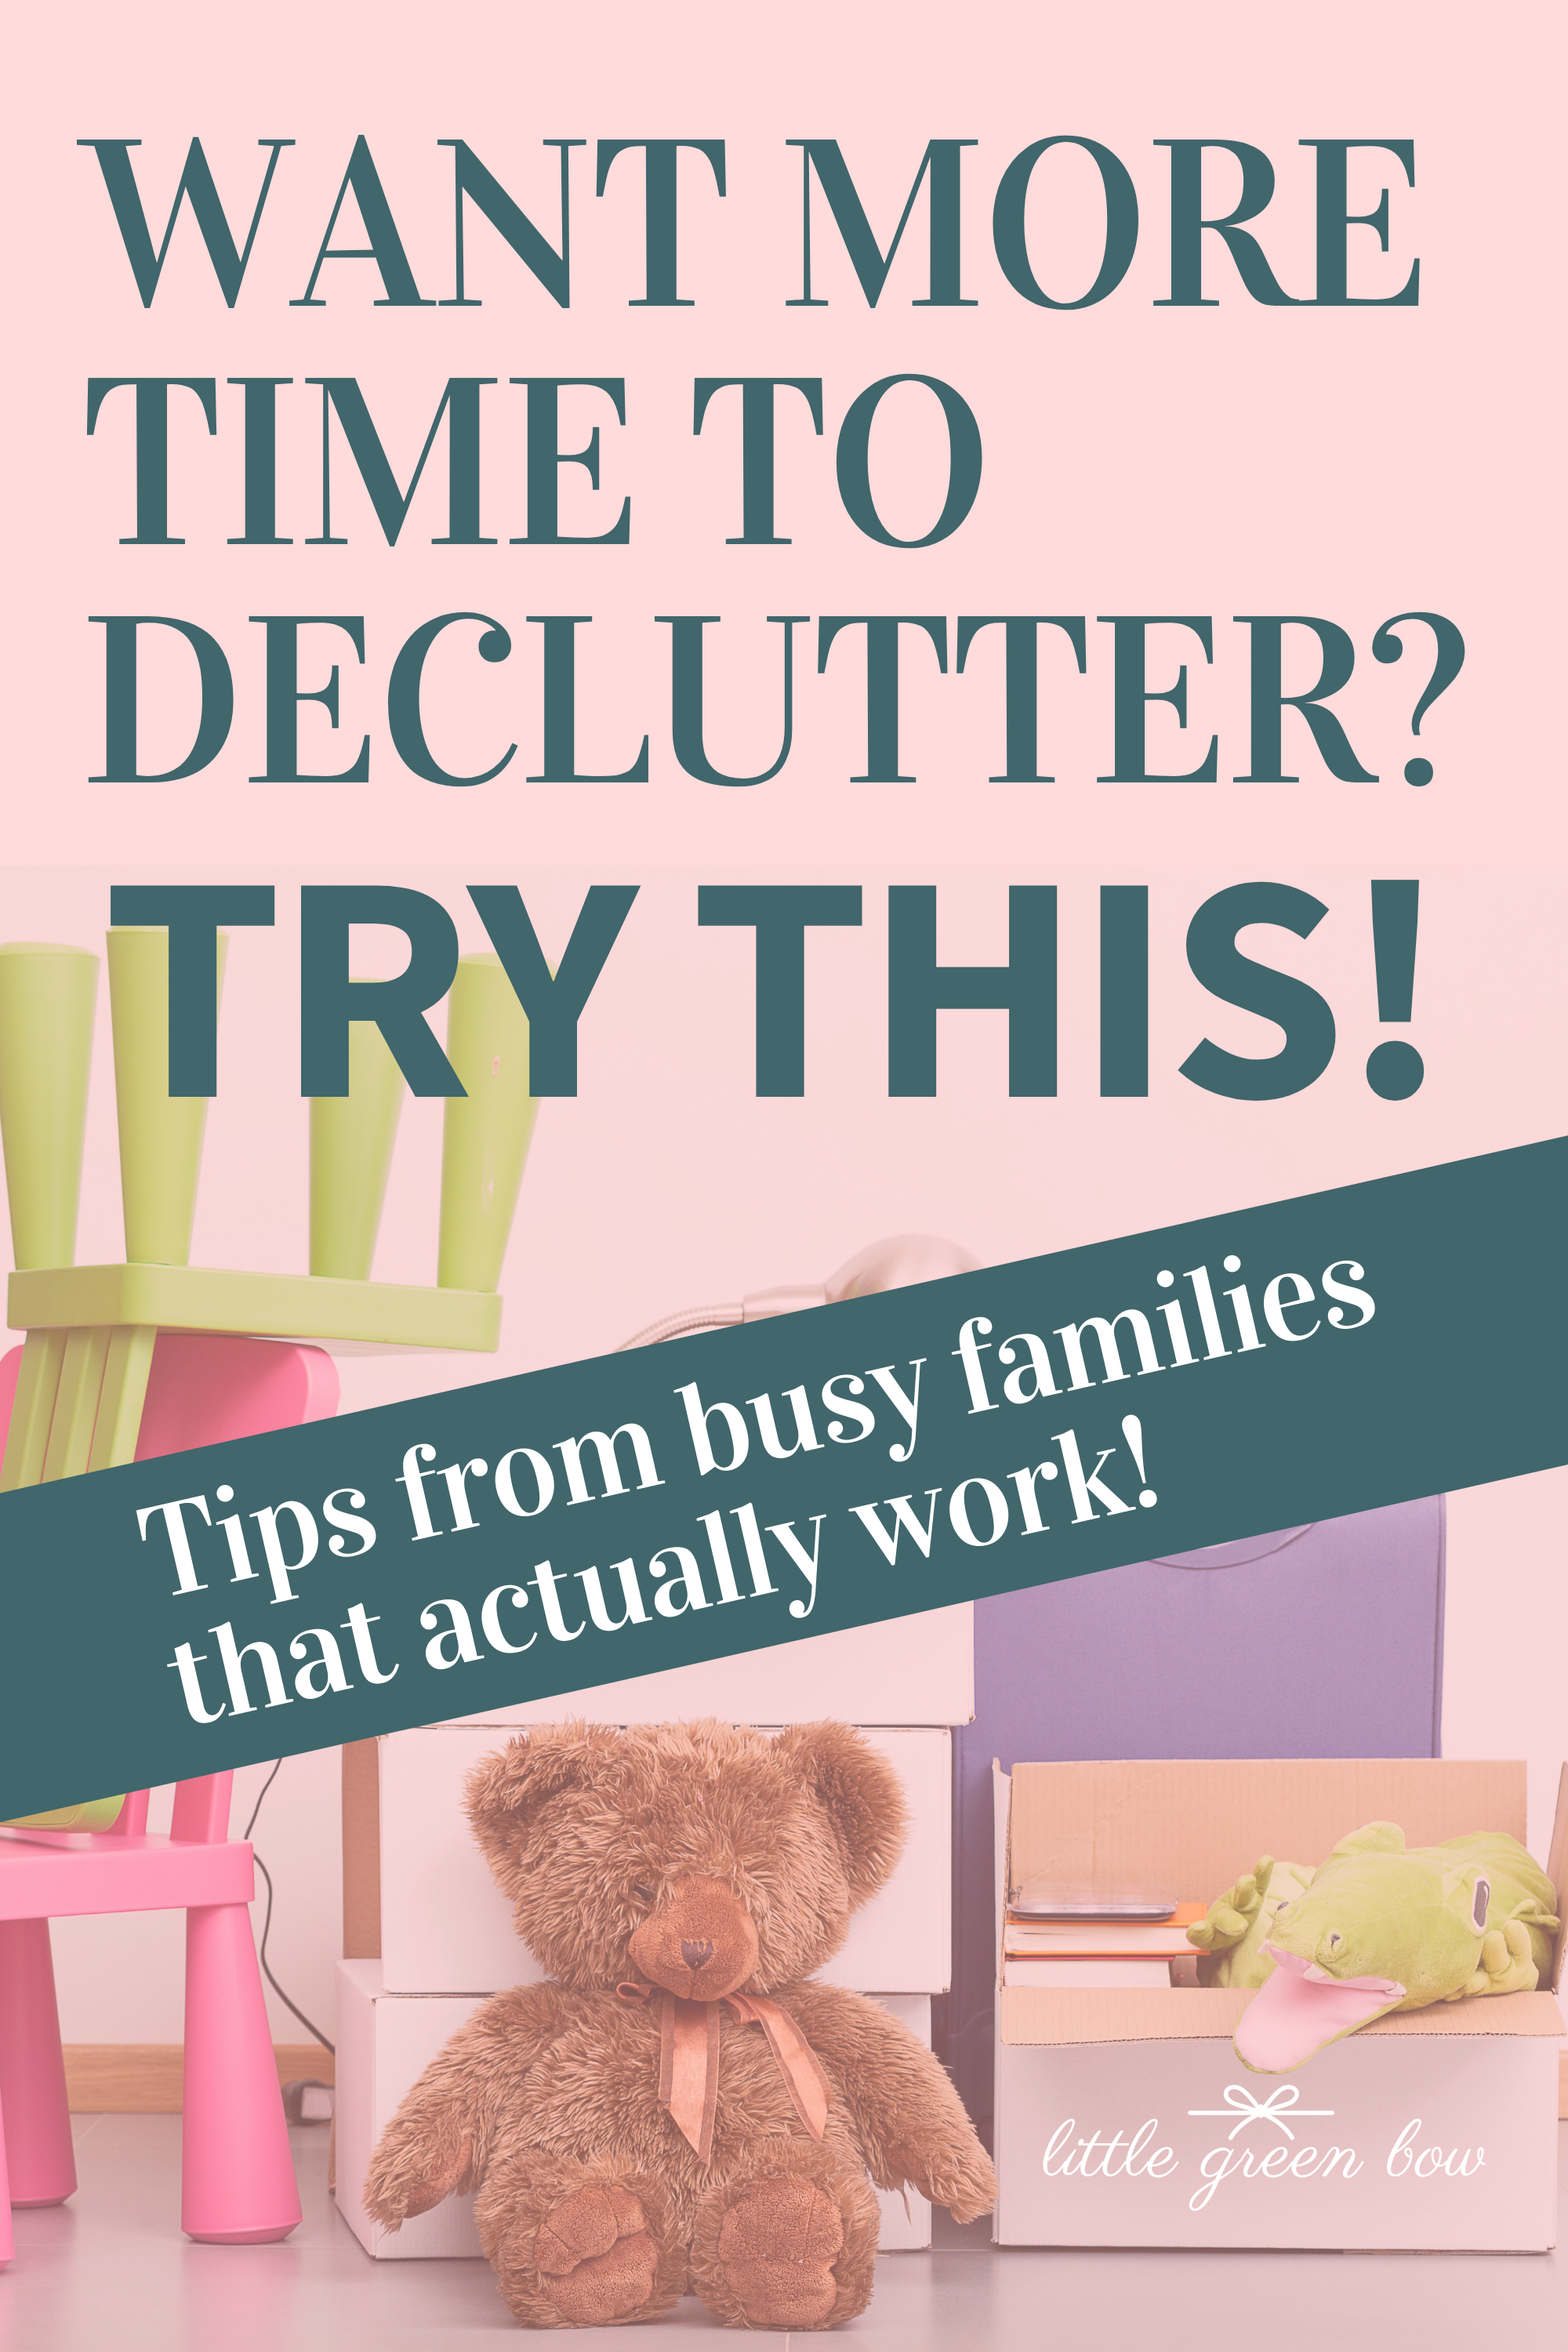 Want More Time to Declutter? Try This!